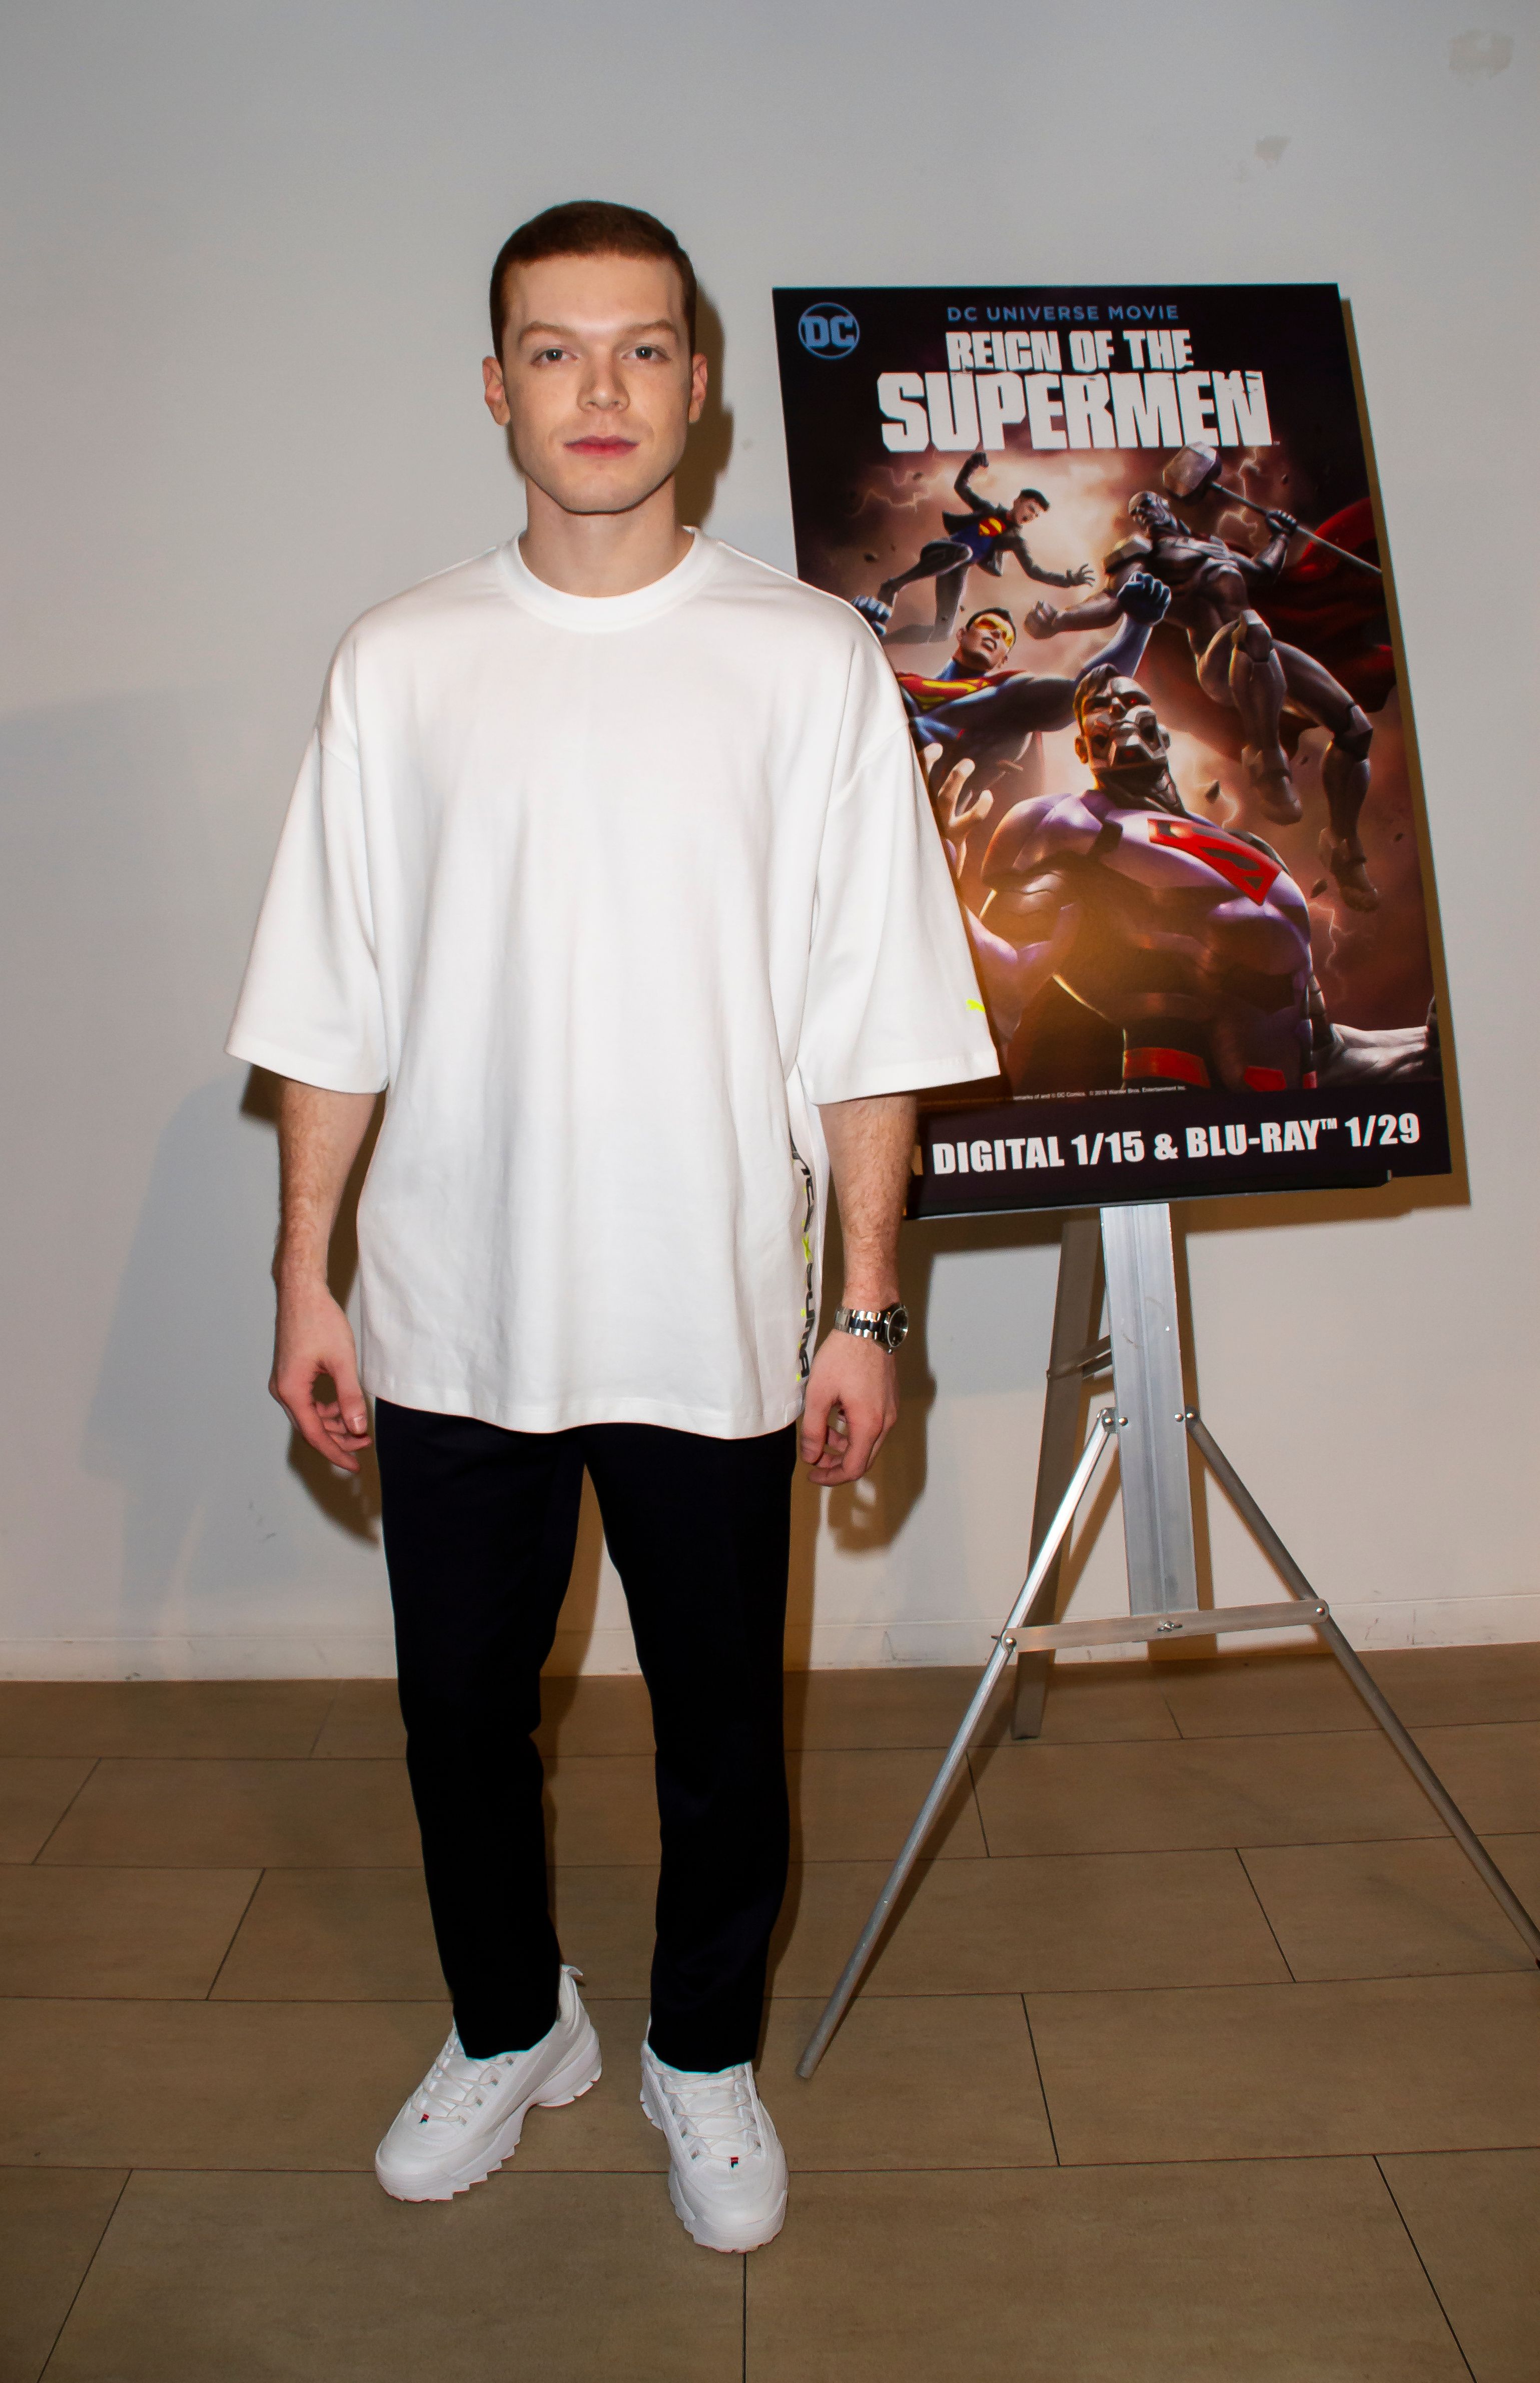 Cameron Monaghan wears a white T-shirt and tennis shoes.